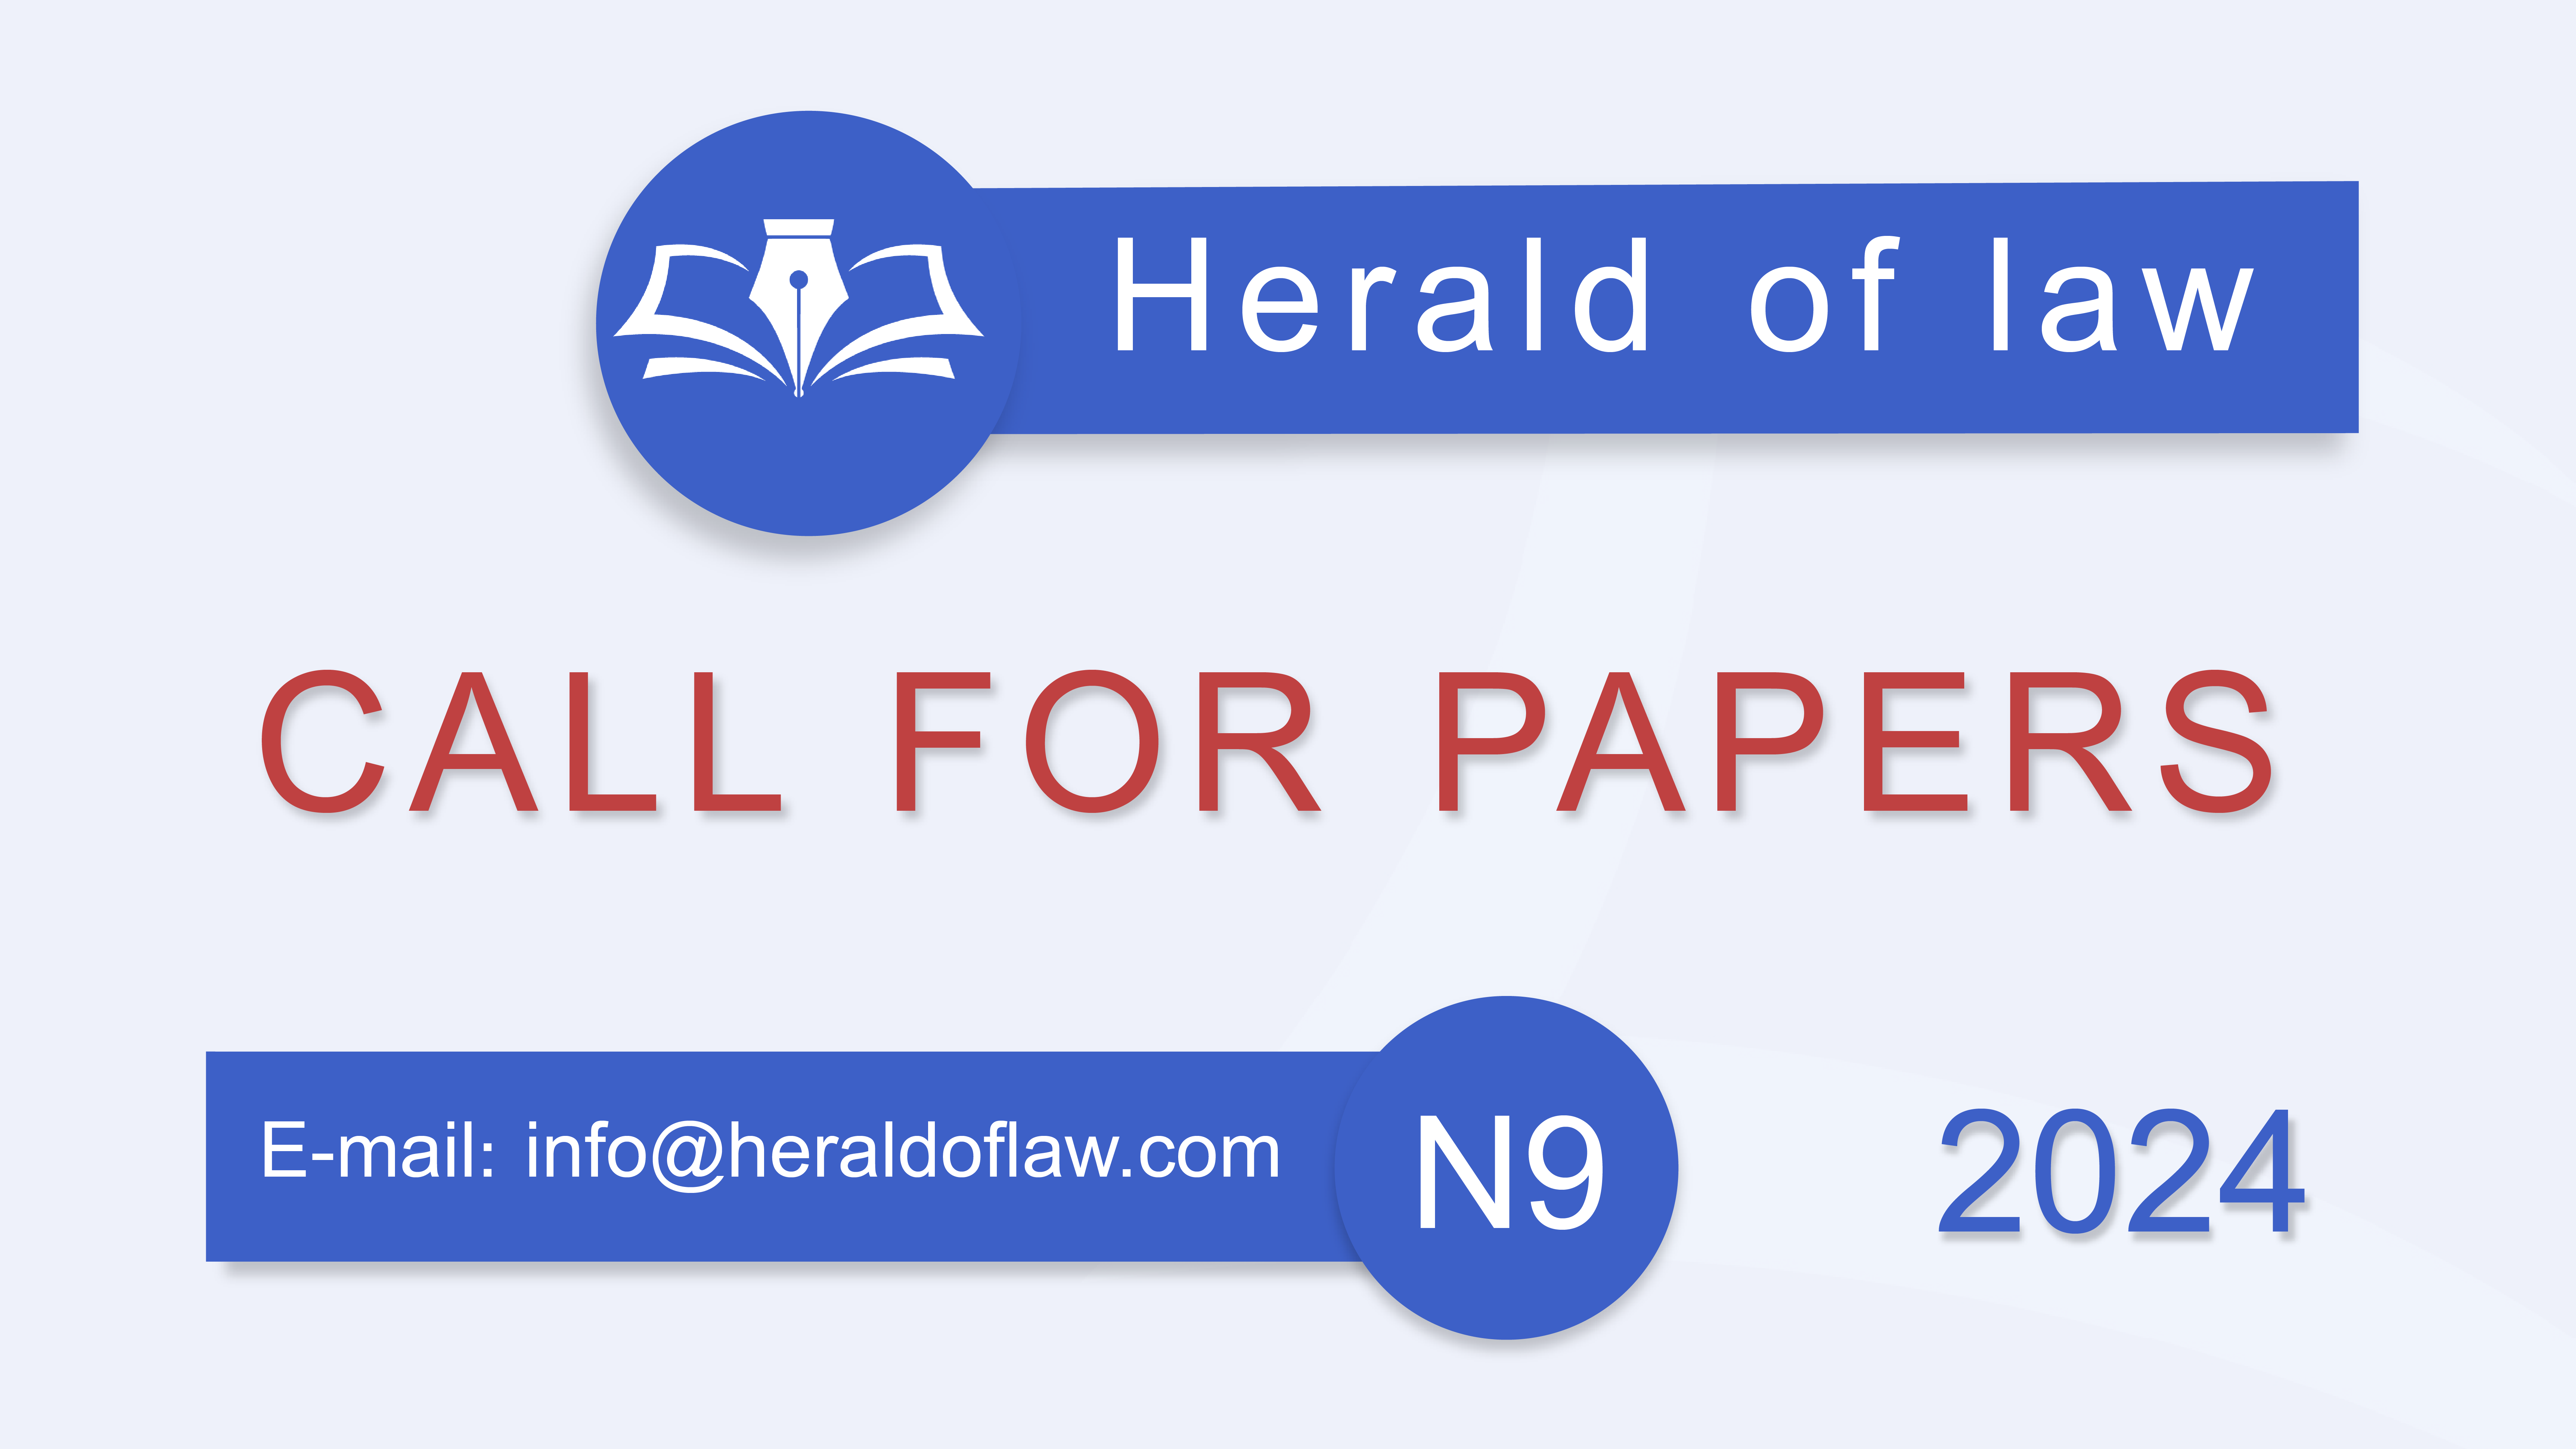 International Scientific Journal “Herald of Law” Announces Article Competition for the 9th (July) Issue of the Journal!